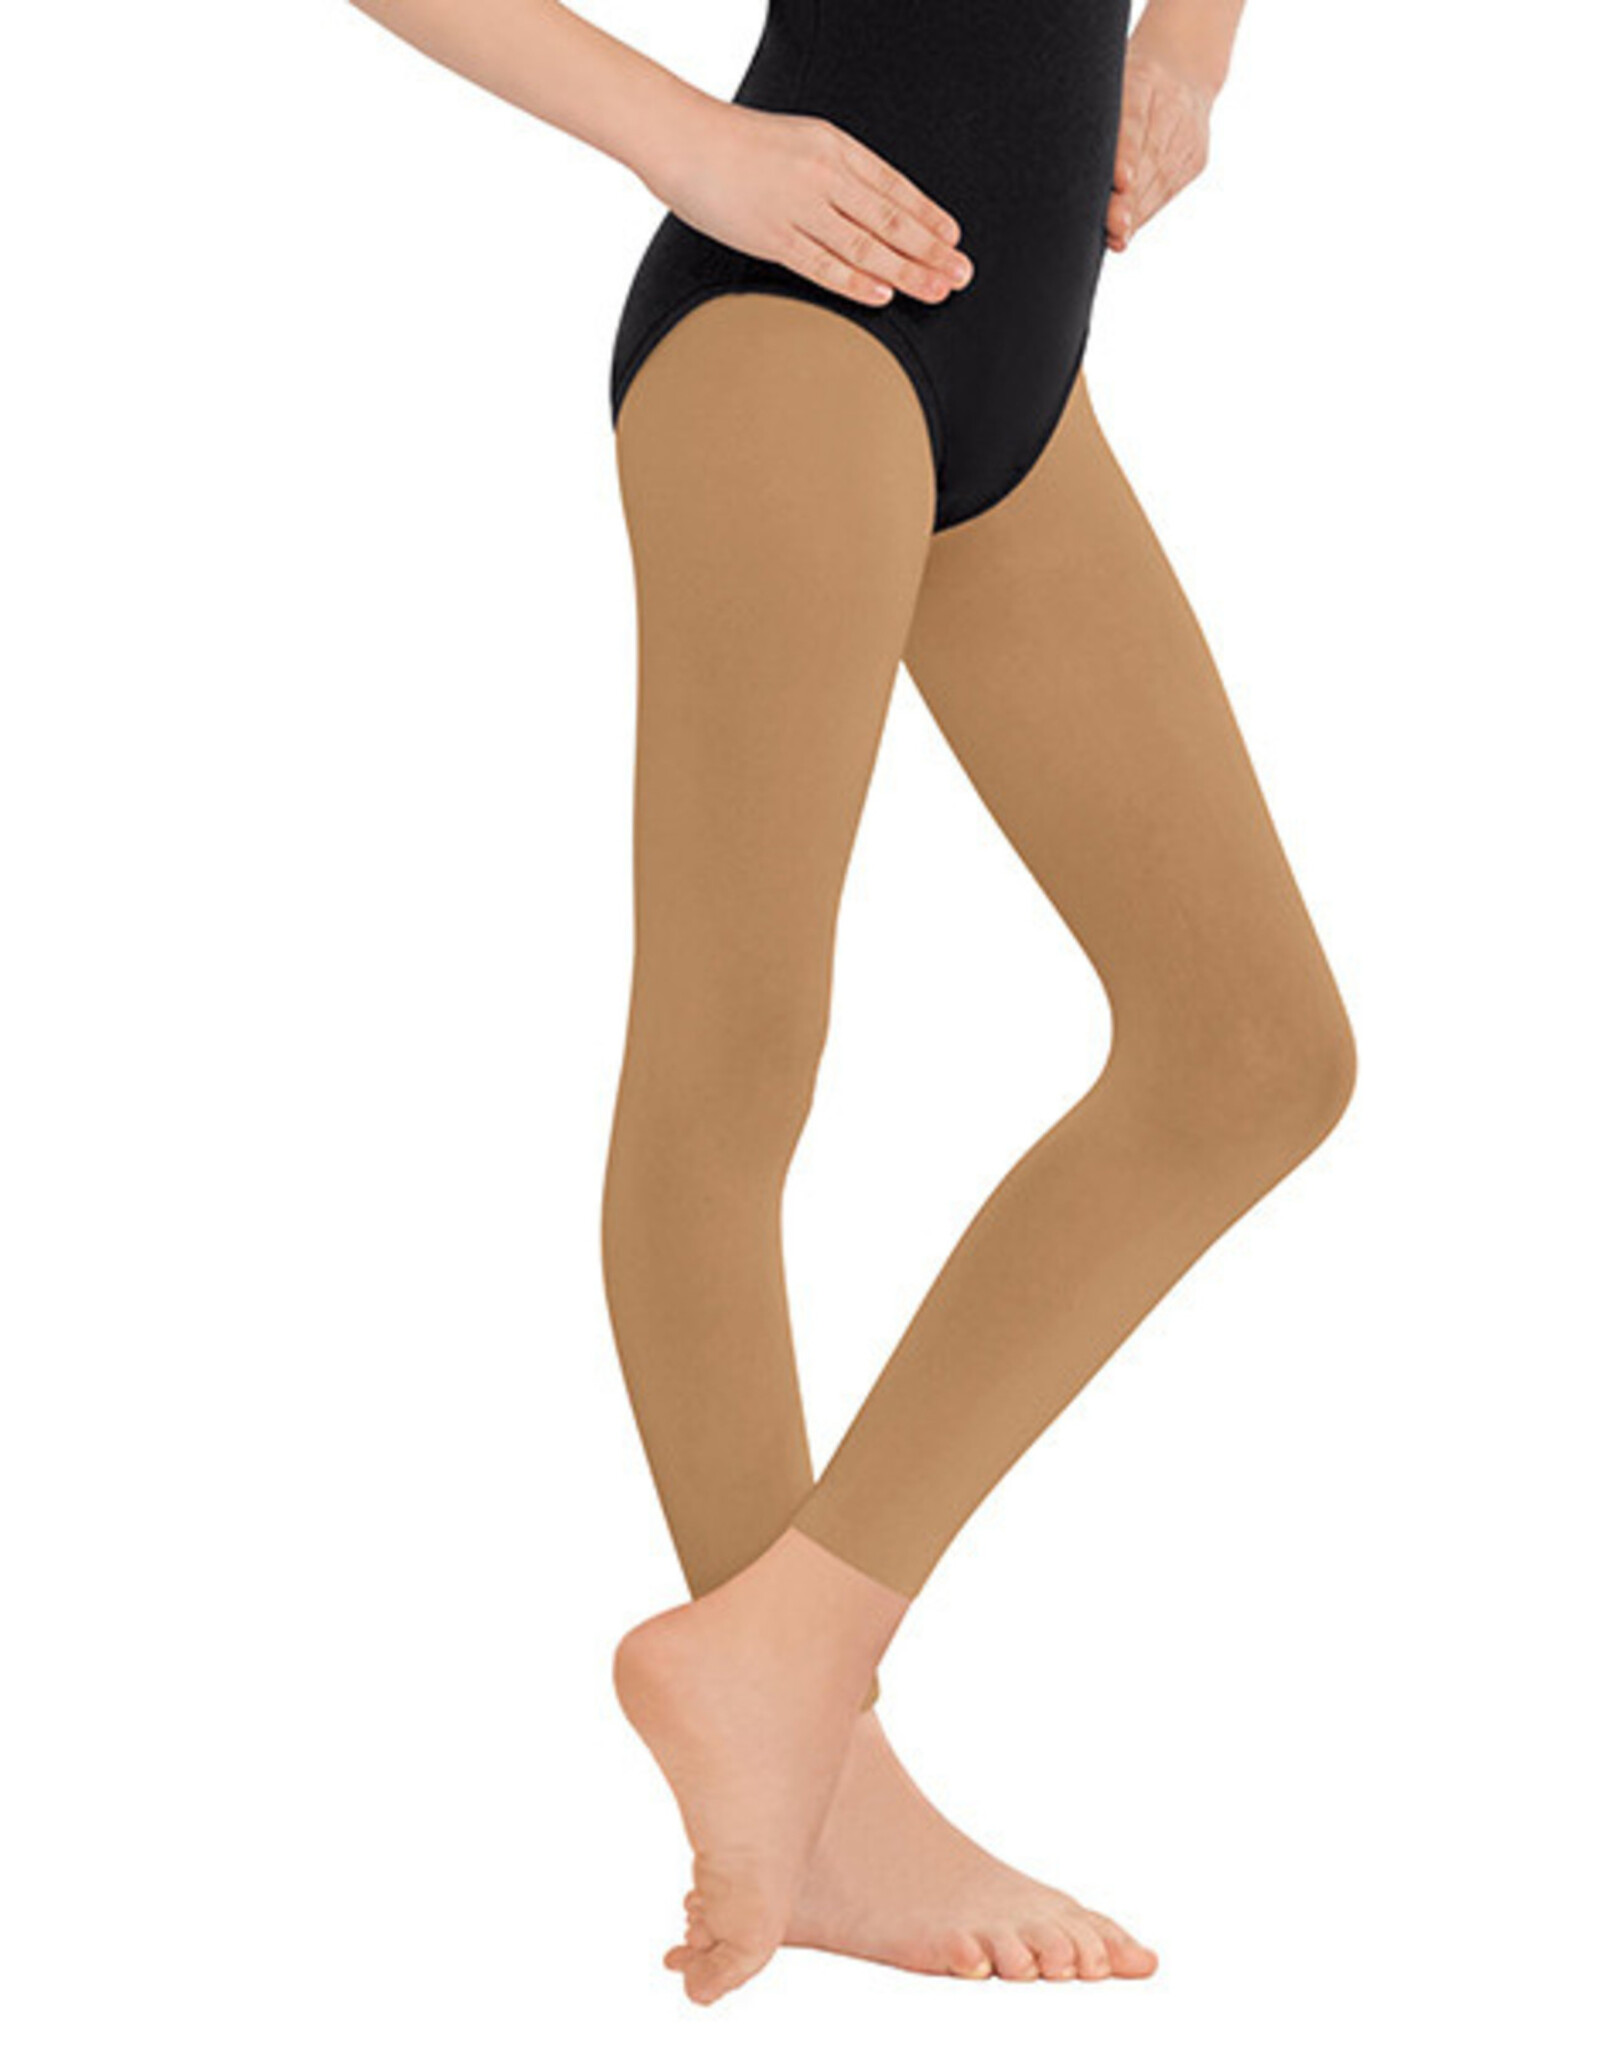 ADULT CAPEZIO FOOTLESS TIGHTS WITH SELF KNIT WAISTBAND - 1917